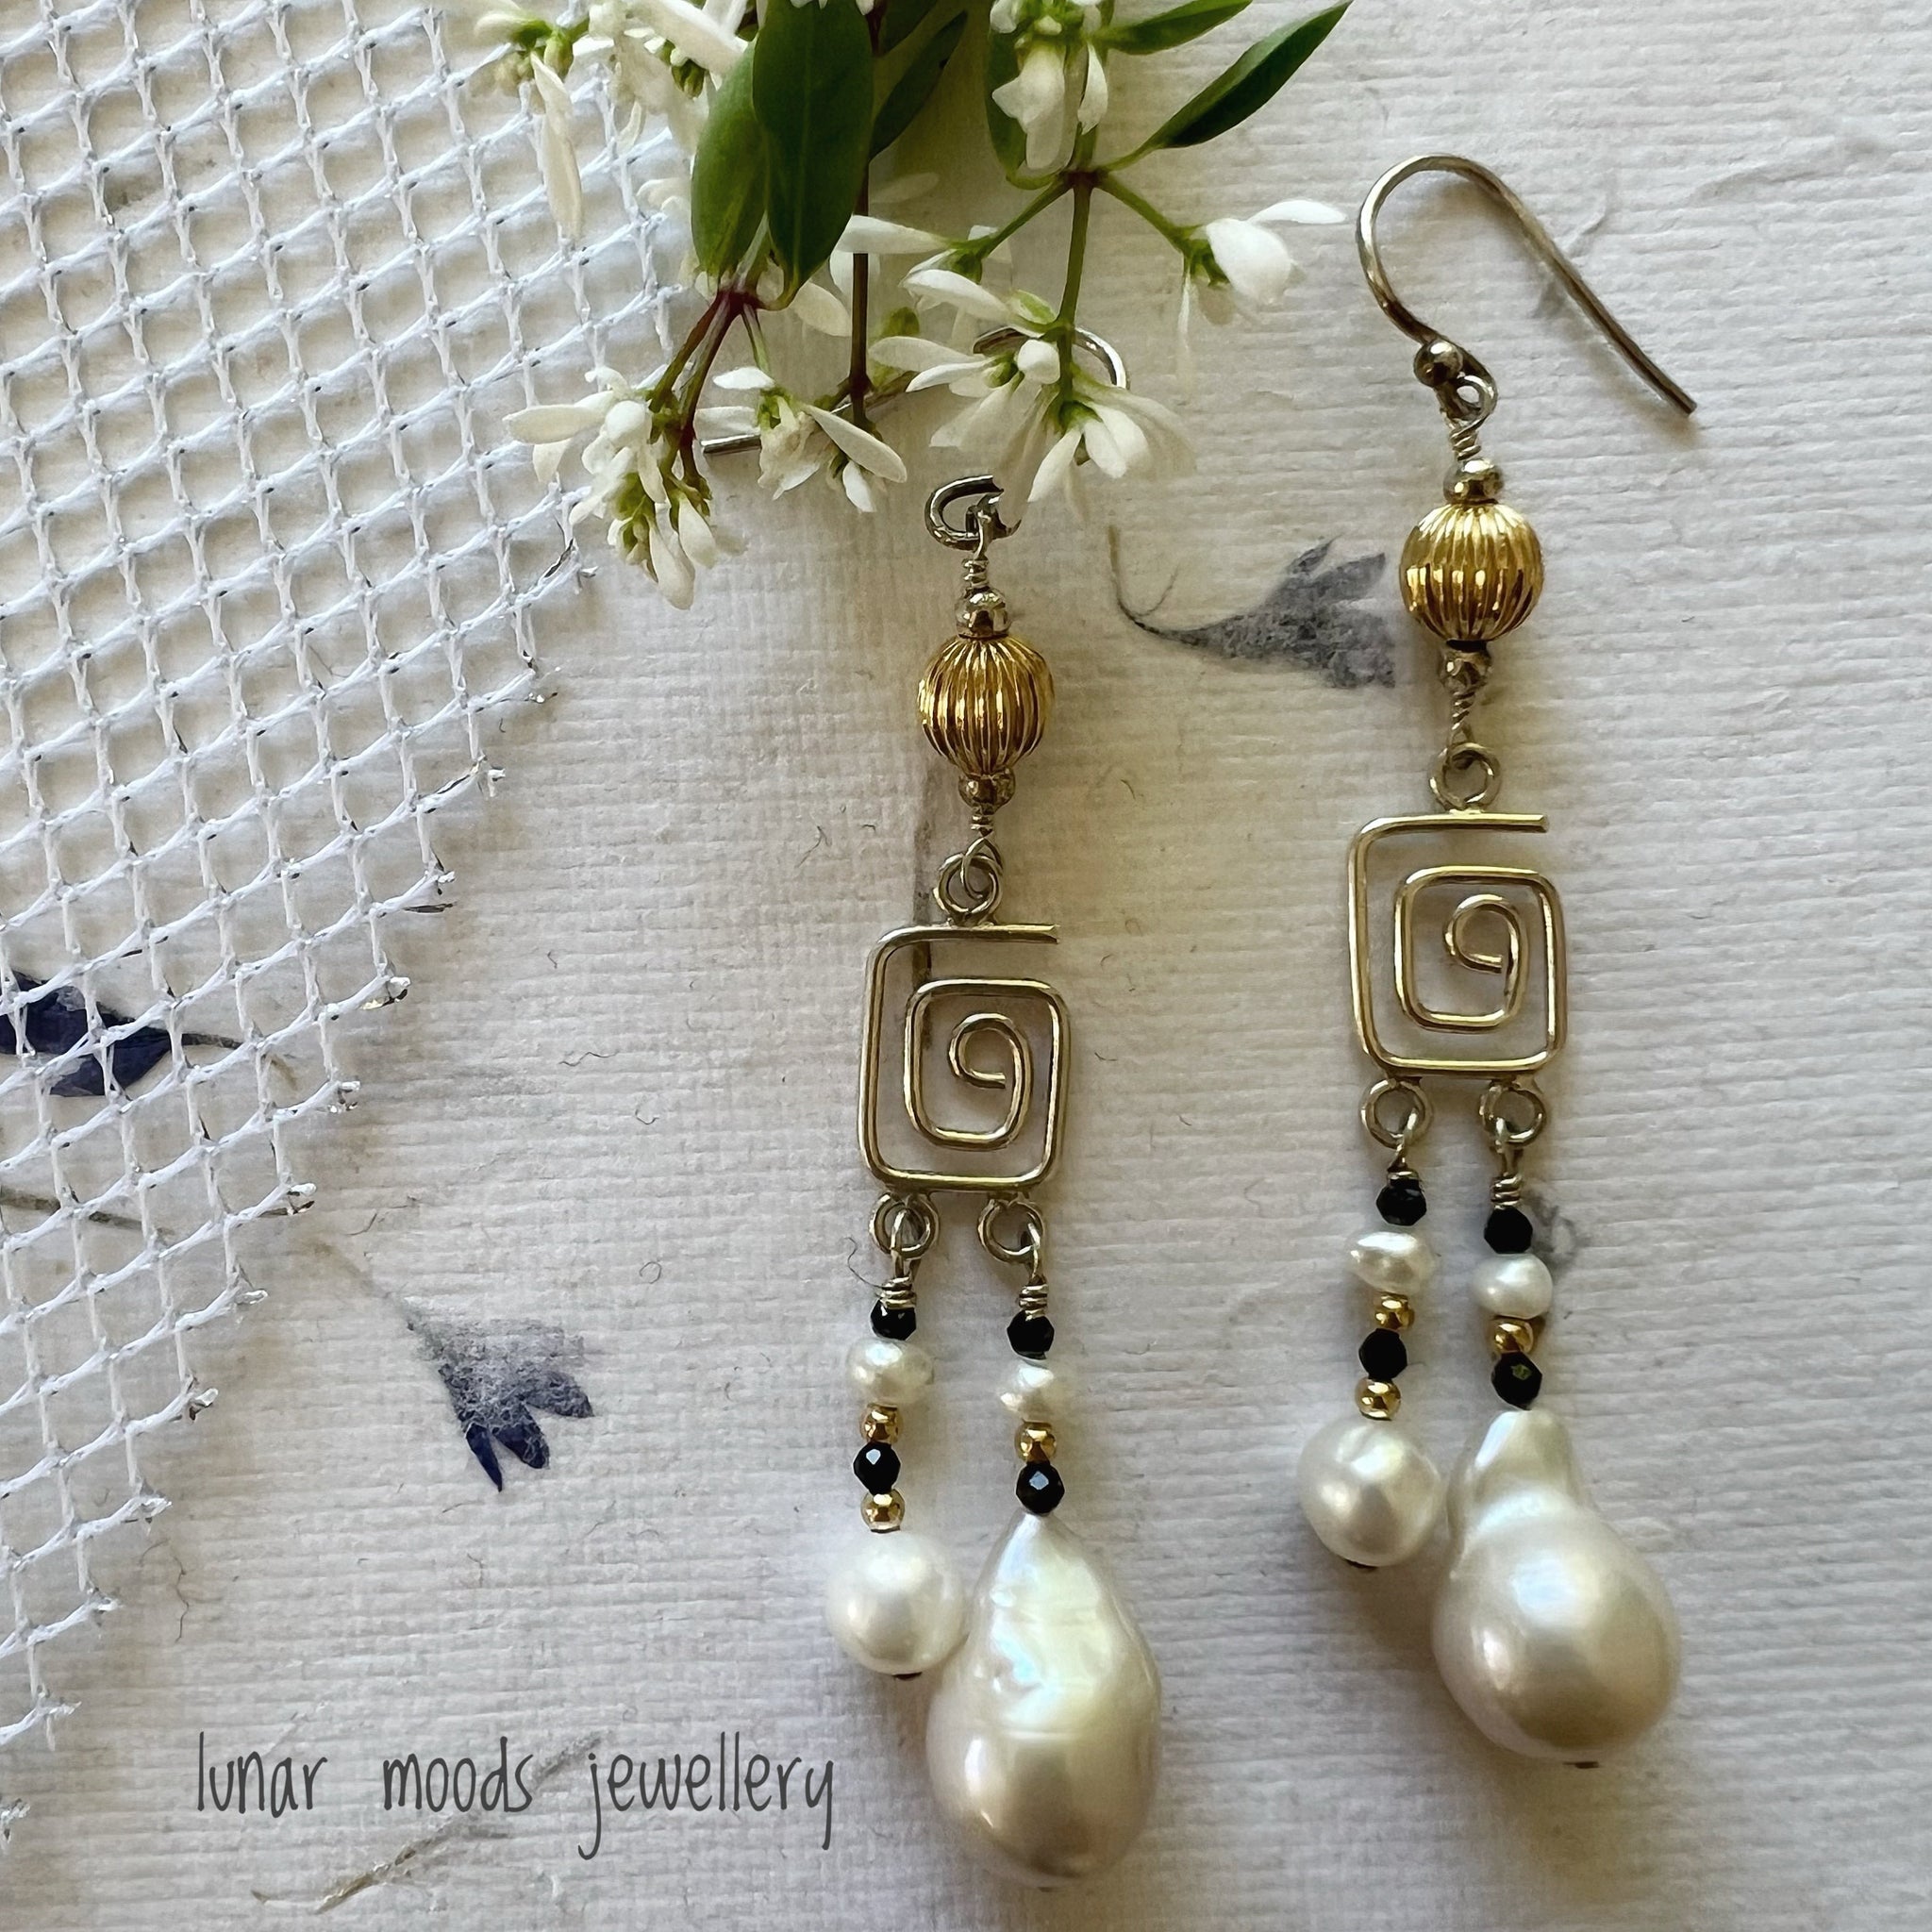 White Freshwater Pearls and Black Spinel Sterling Silver Earrings